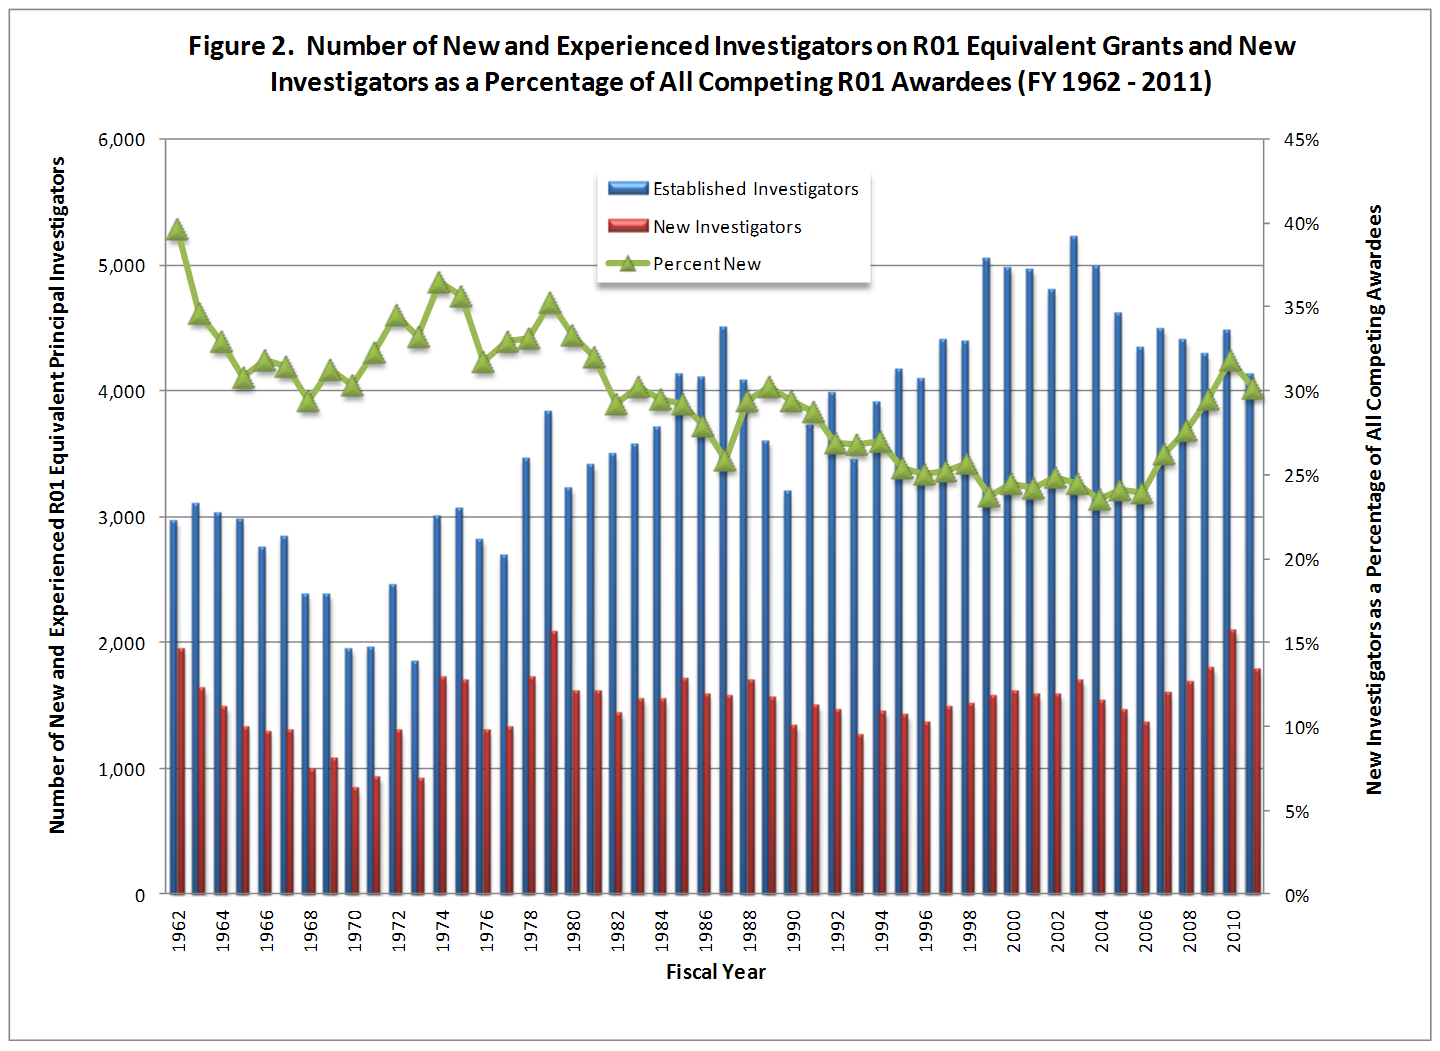 Number of new and experienced investigators on competing R01 grants showing the percent new fall from approximately 40% in 1962 to below 25% in the early 2000s.